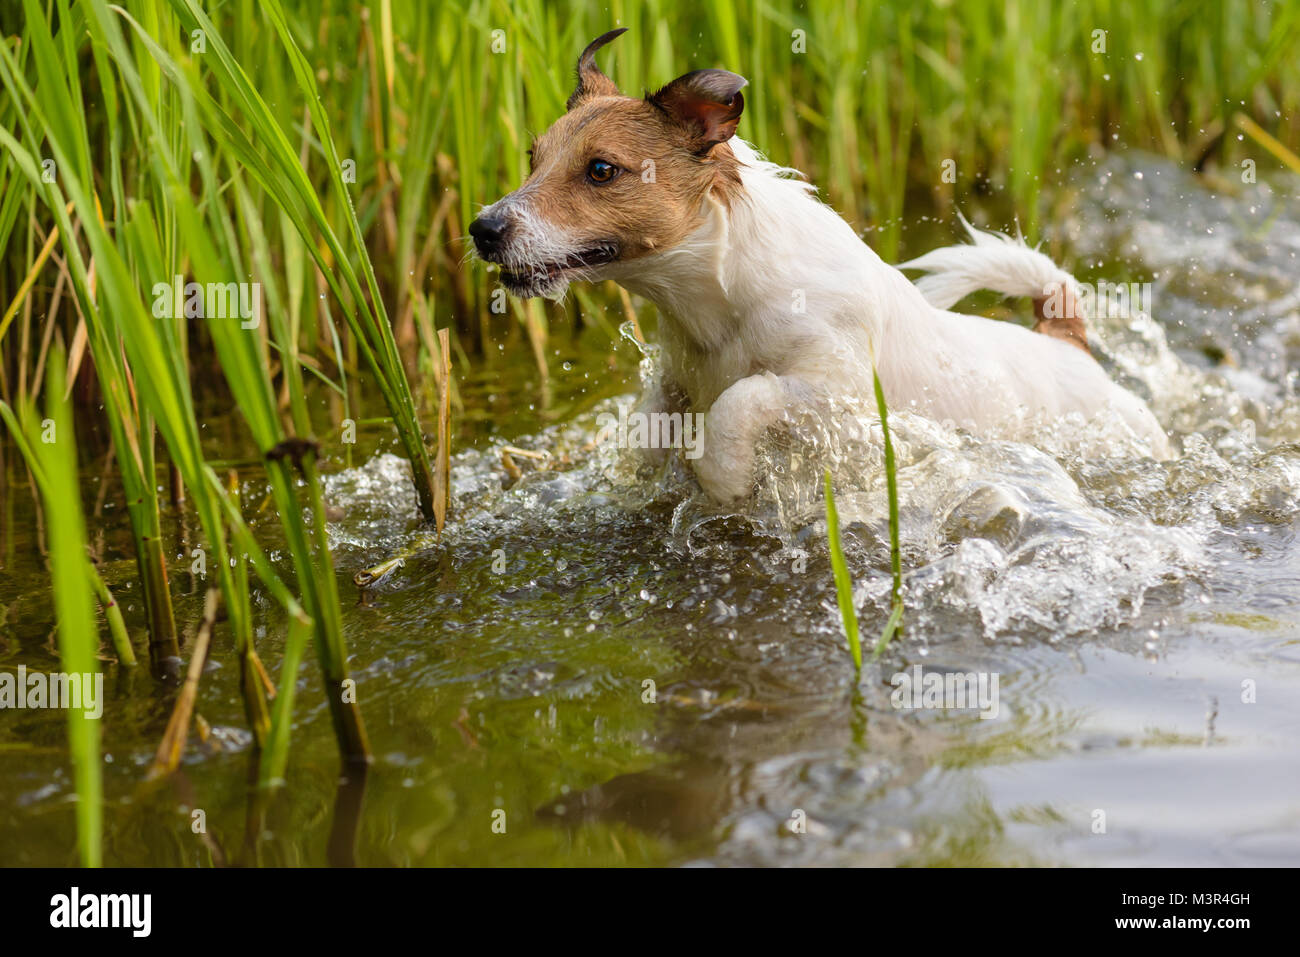 Hunting dog running in swamp looking for  prey Stock Photo